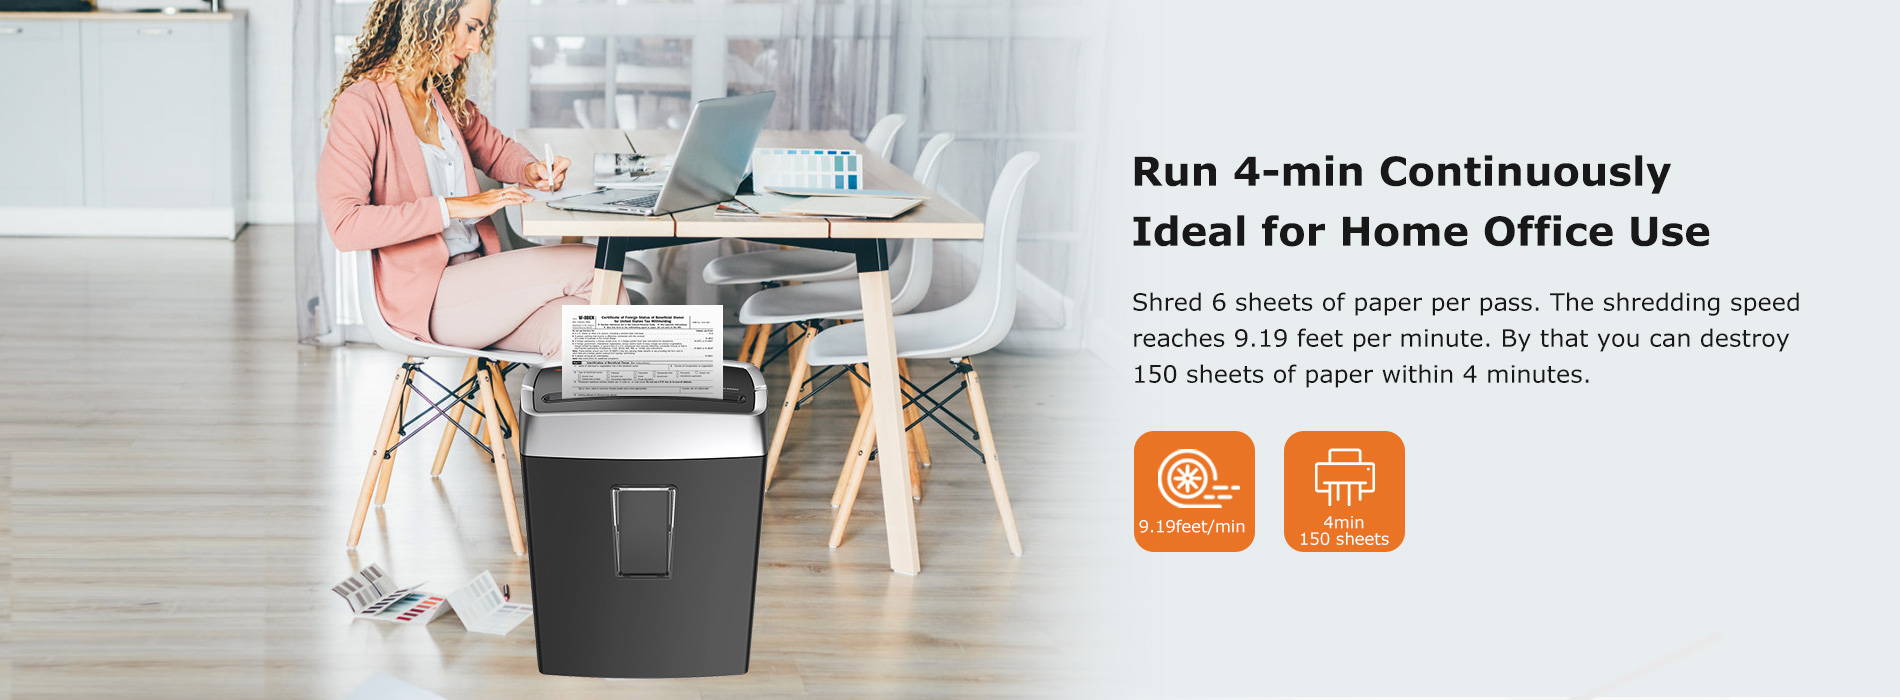 Run 4-min Continuously Ideal for Home Office Use Shred 6 sheets of paper per pass. The shredding speed reaches 9.19 feet per minute. By that you can destroy 150 sheets of paper within 4 minutes.